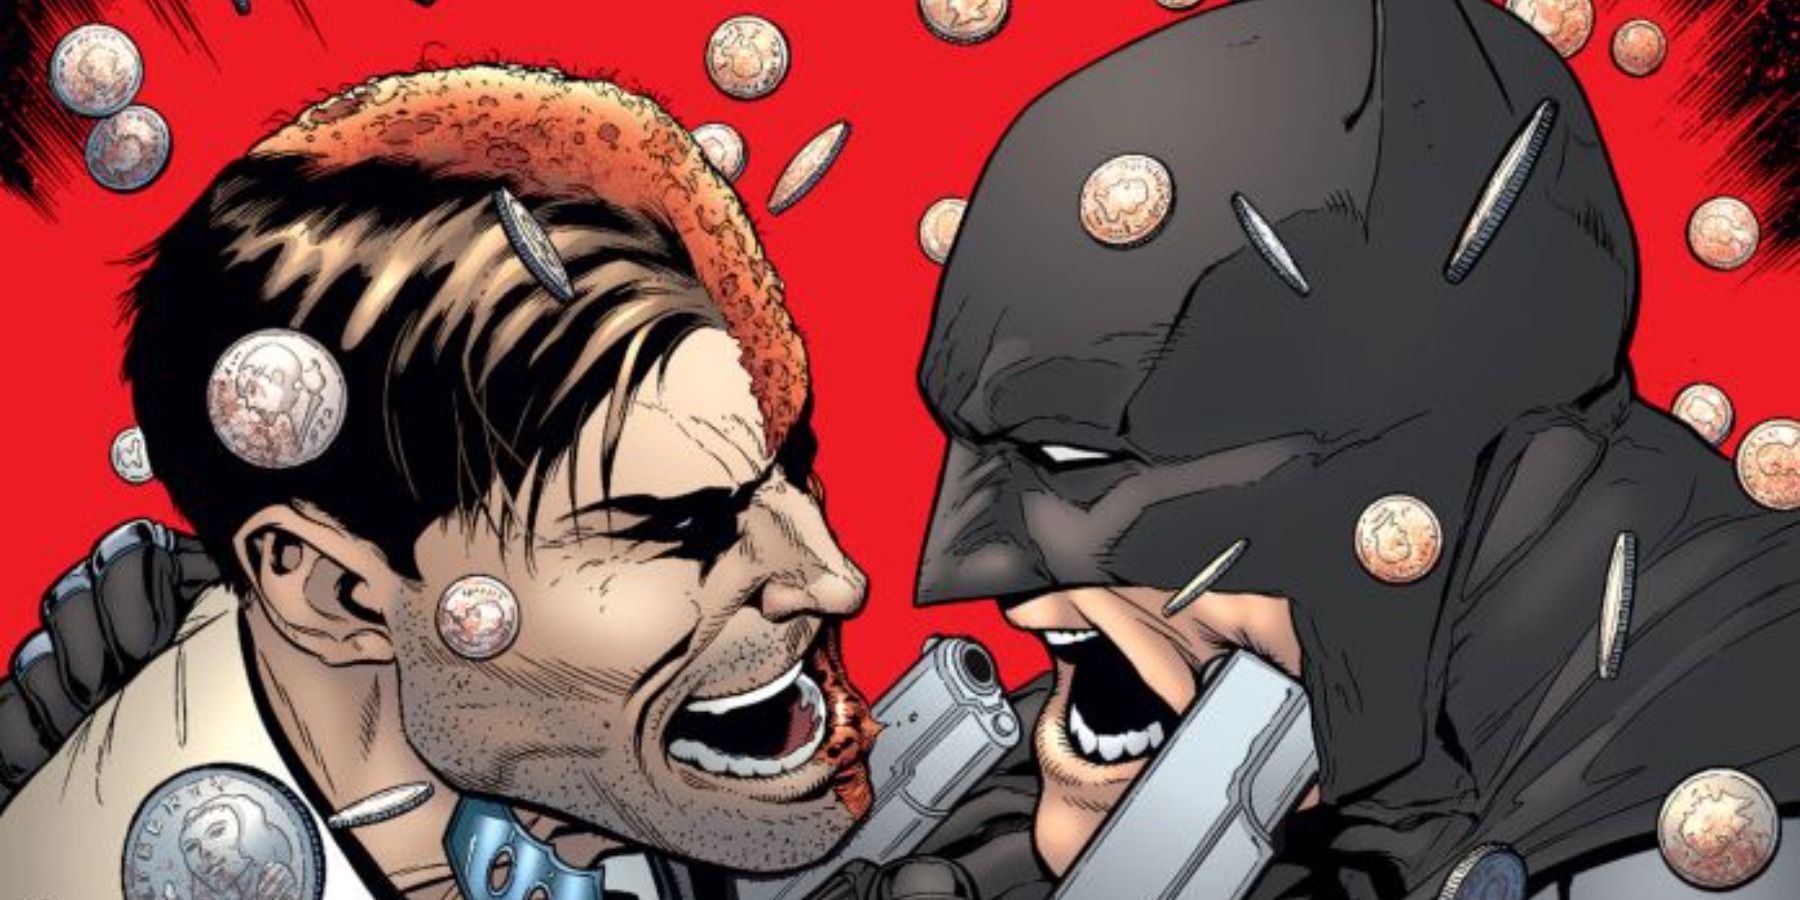 Batman and Two-Face fight as coins rain from above., in a DC comic.